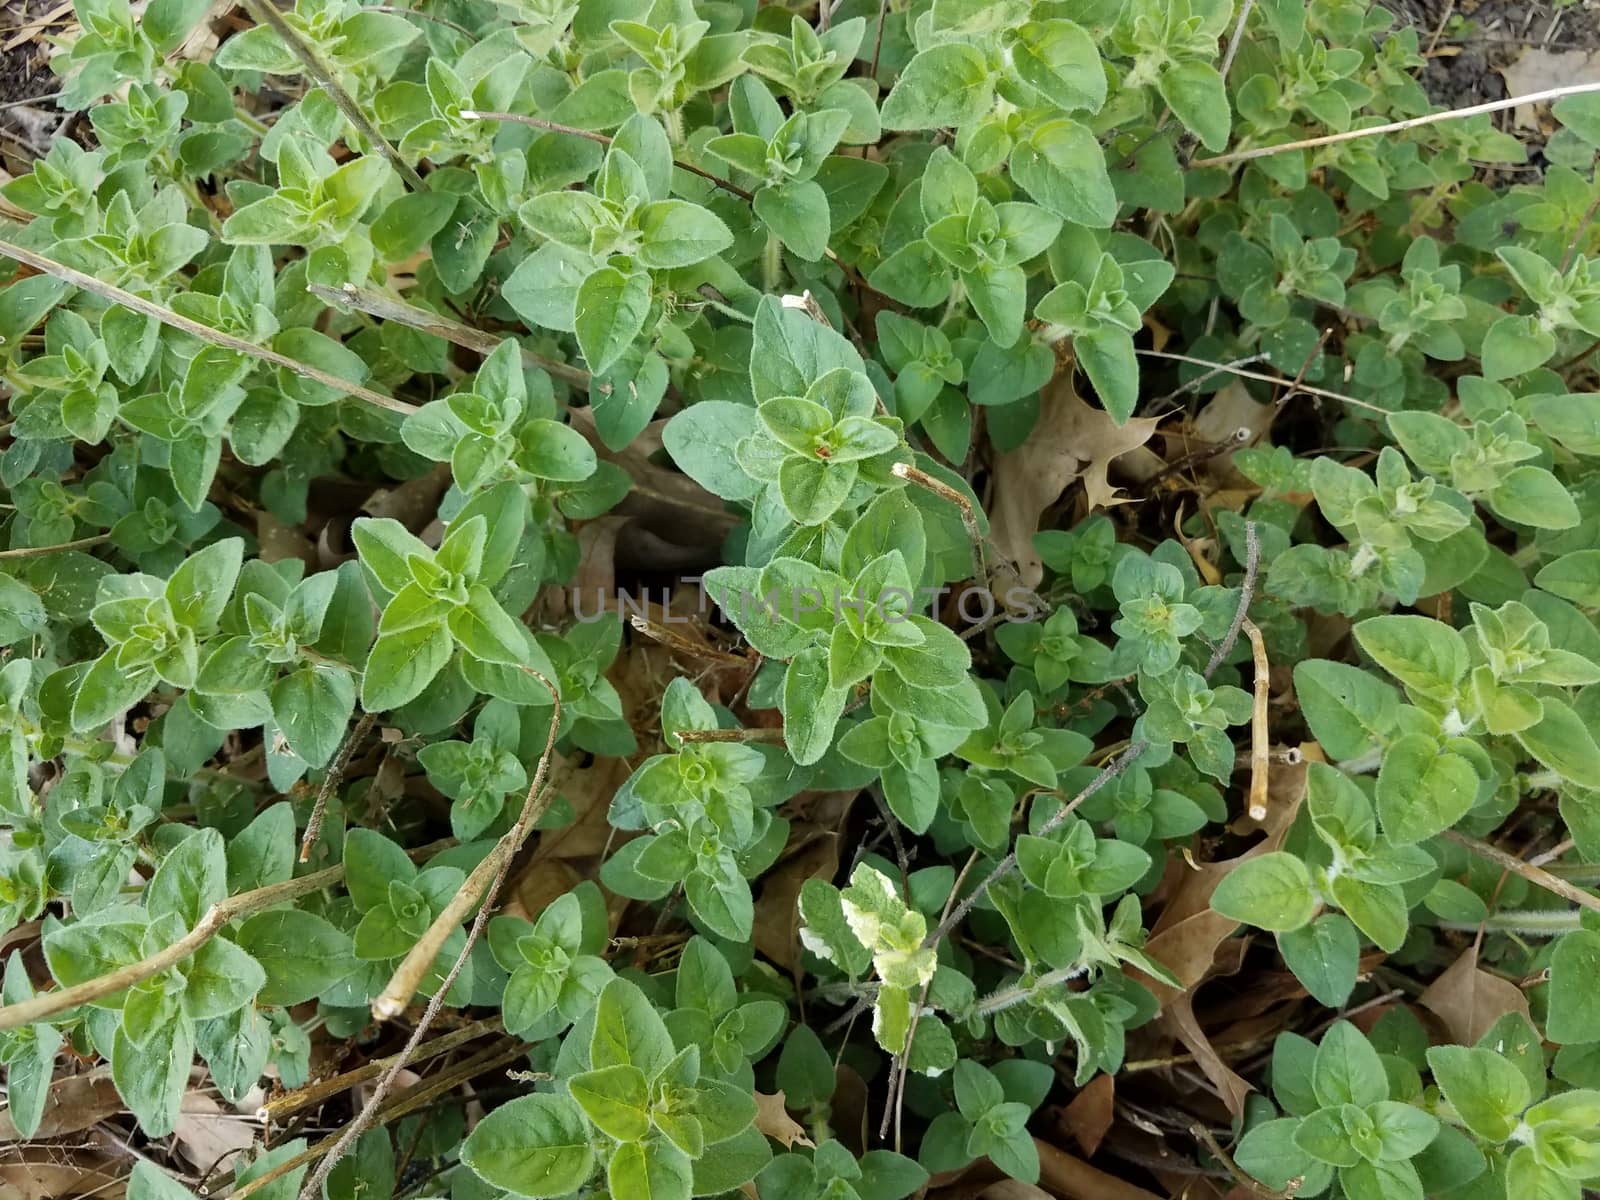 green oregano plant or bush and fallen brown leaves